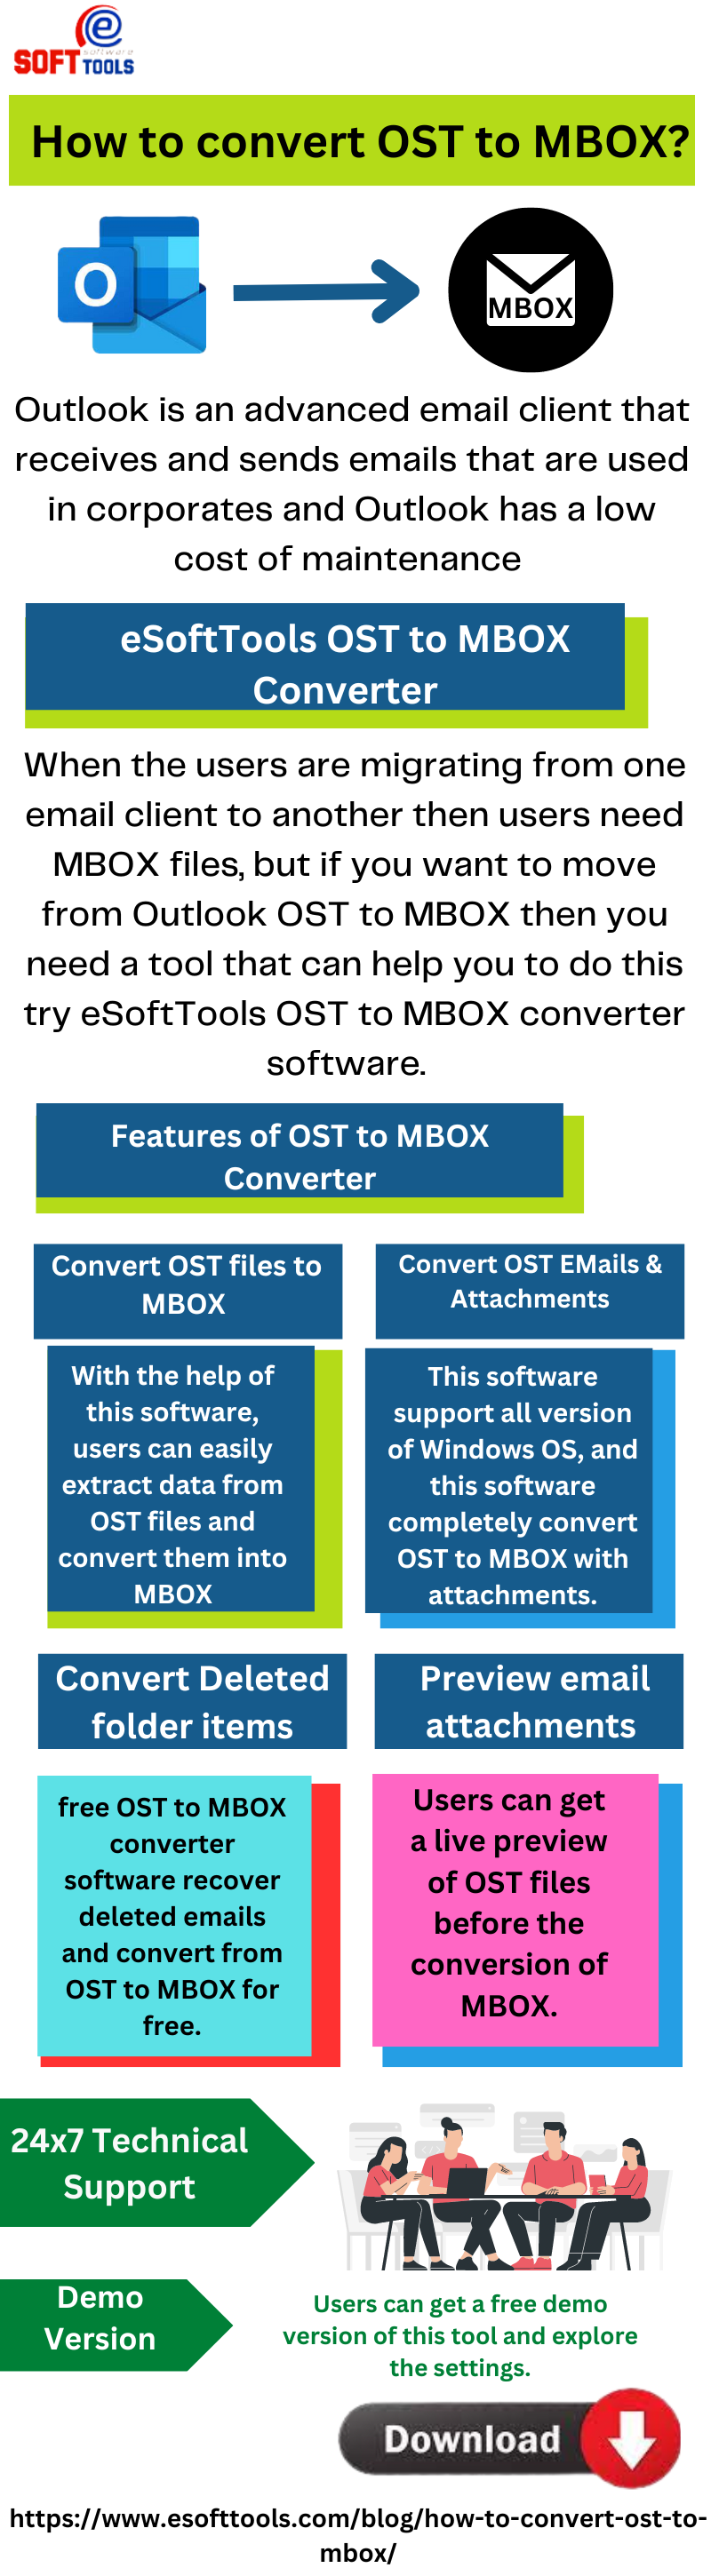 mbox mbox convertor OST outlook to mbox